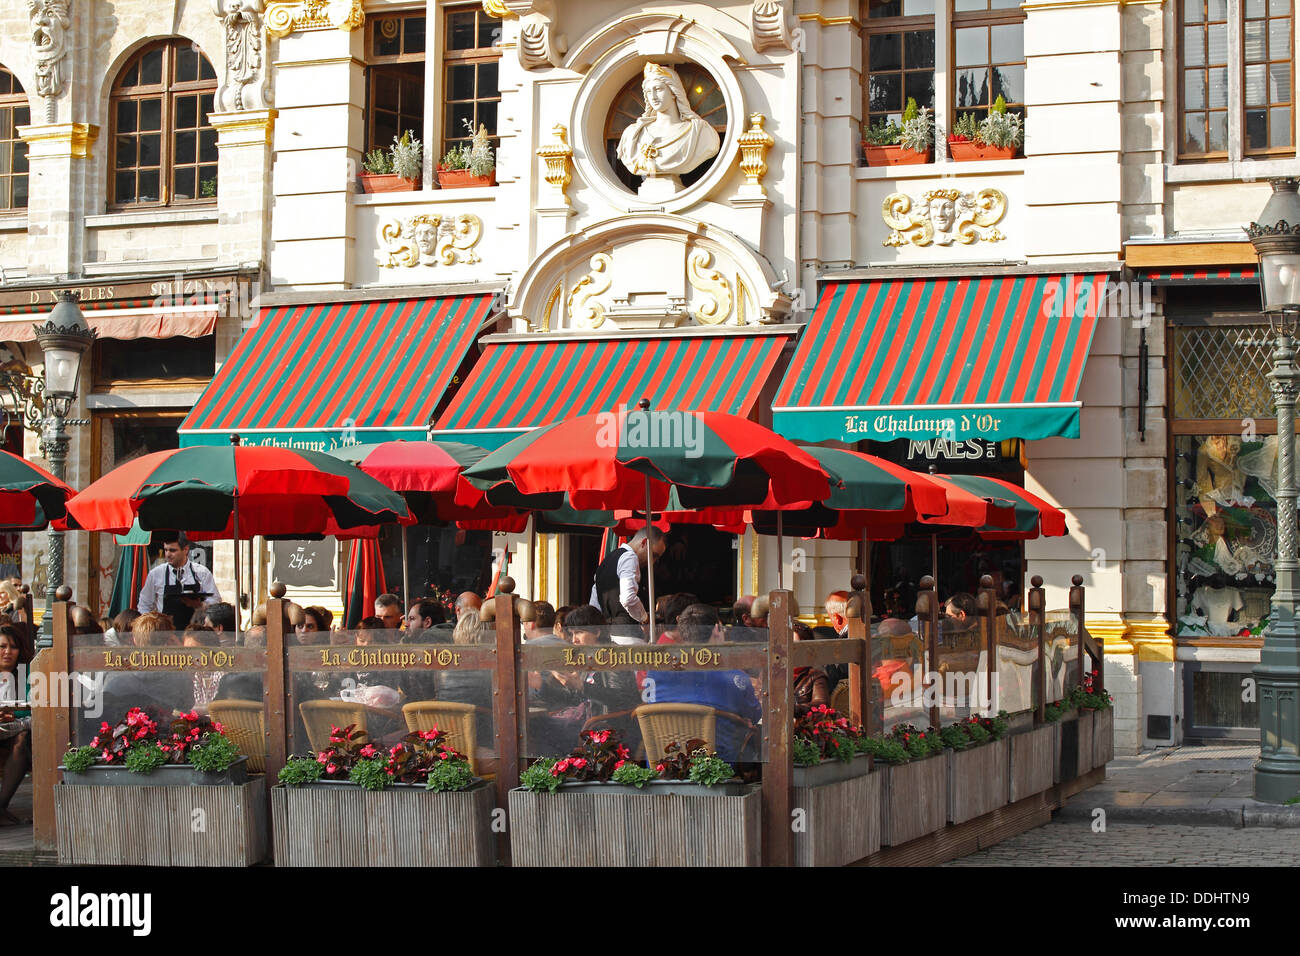 Cafe Restaurant La Chaloupe d'Or on Grand-Place square Stock Photo